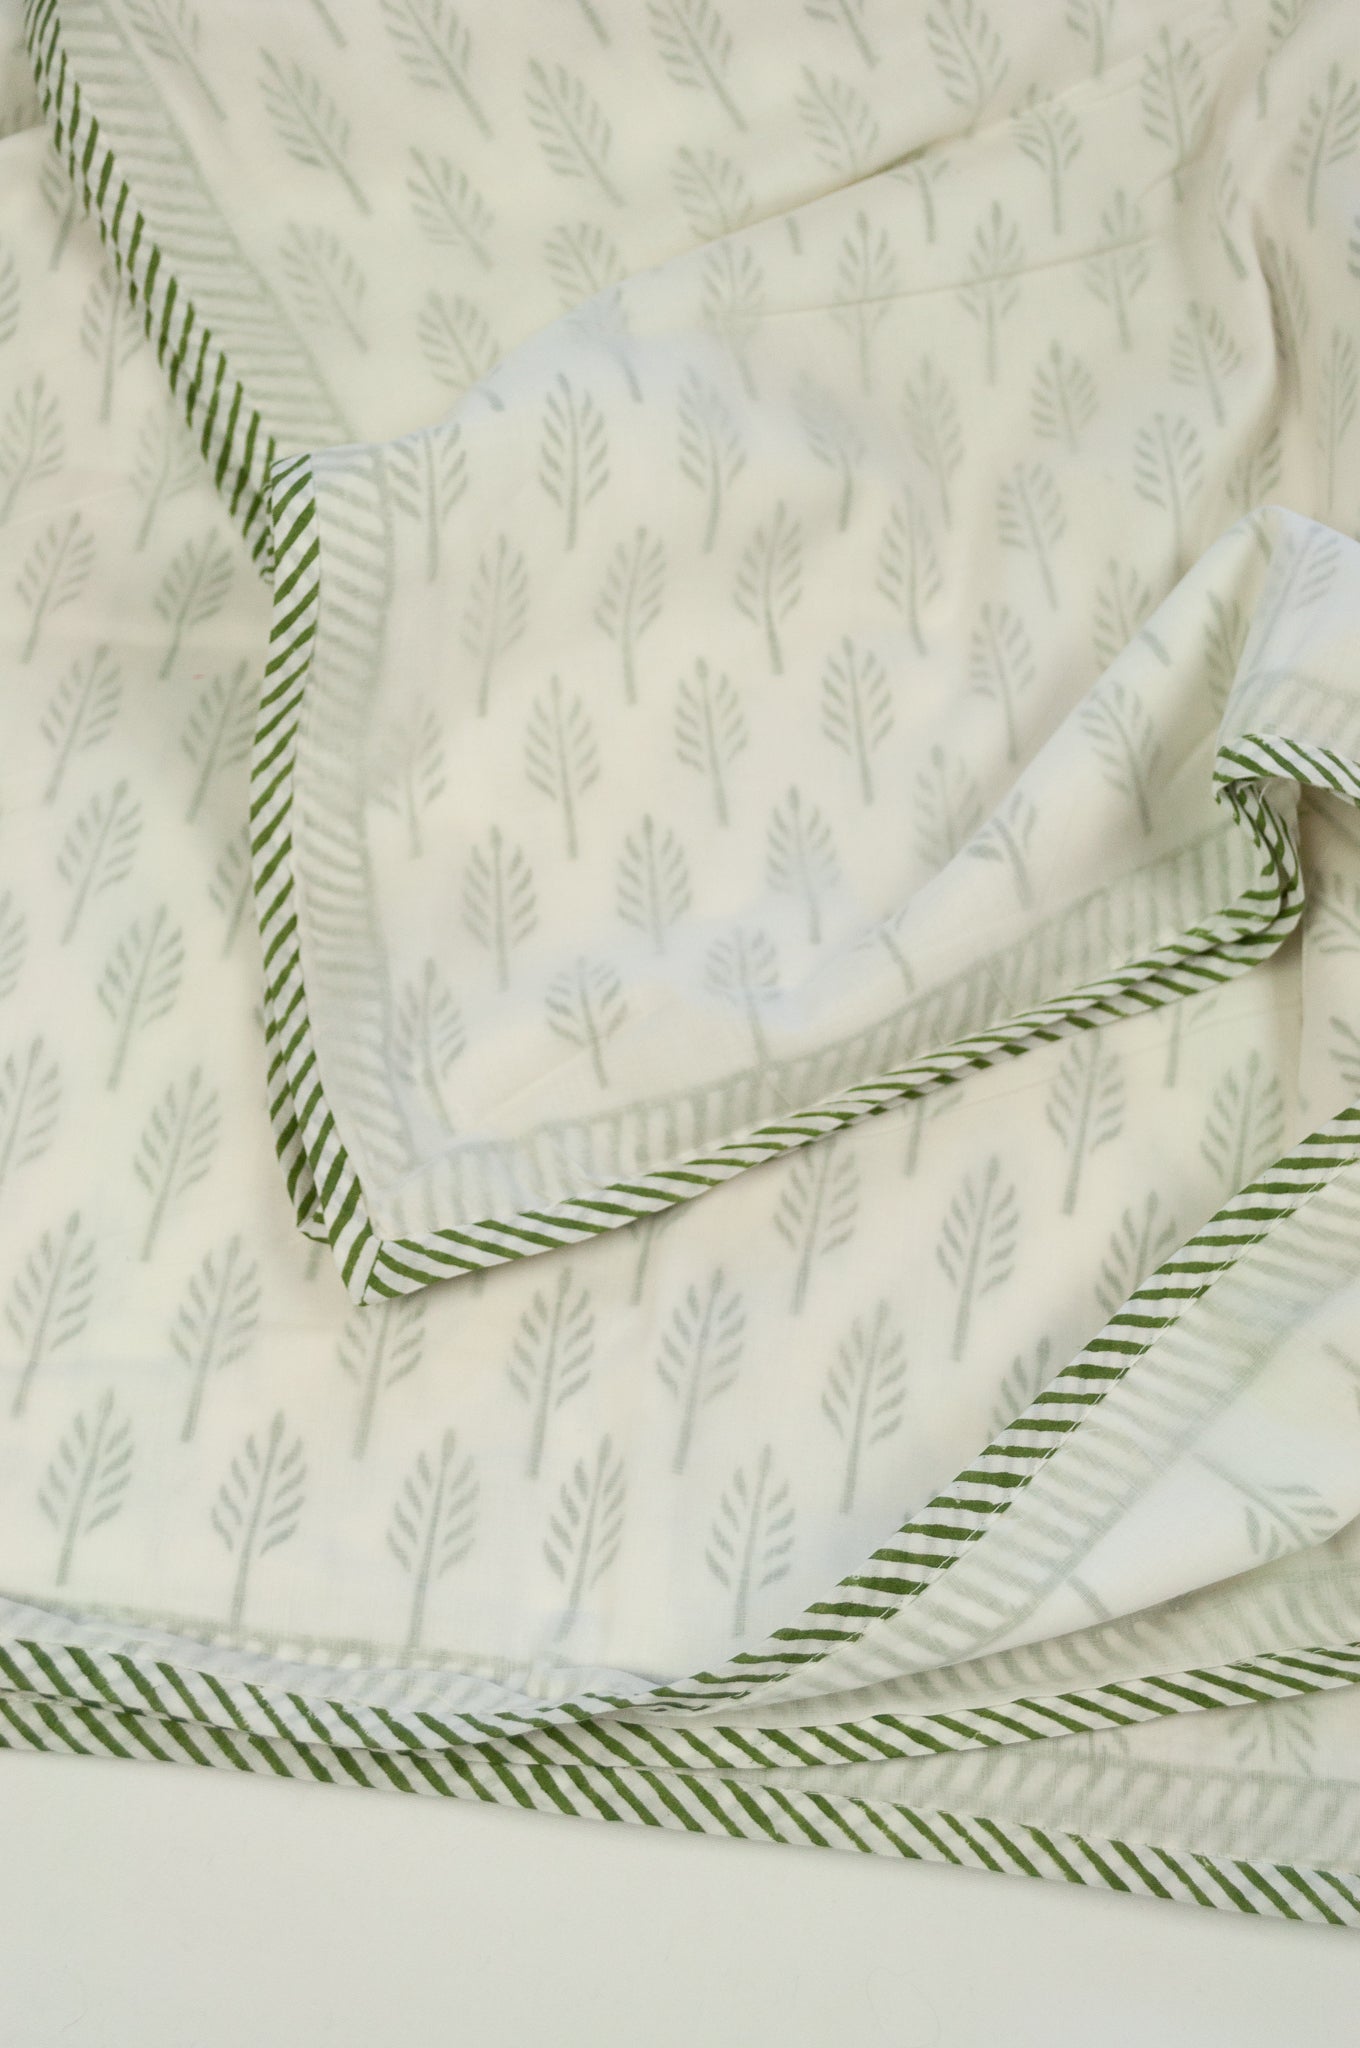 Cotton muslin dohar olive green on white, small palm tree print, blockprinted by hand in Jaipur.